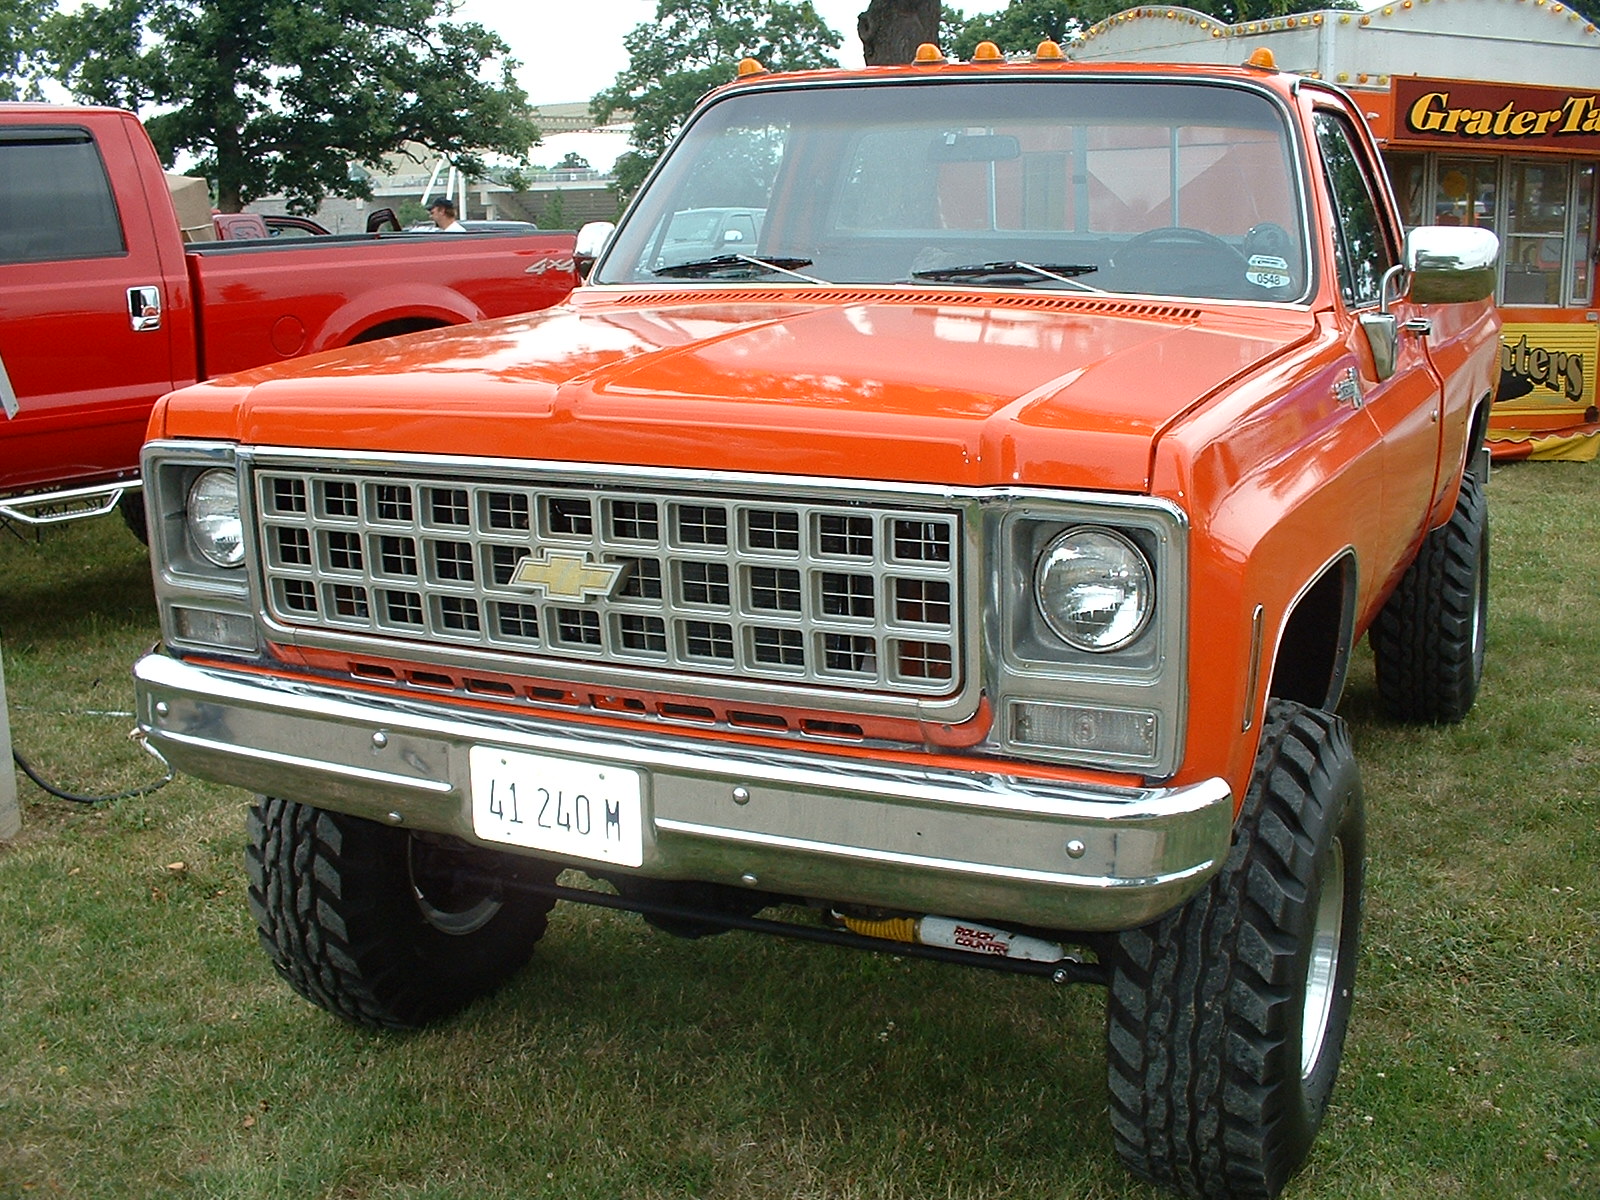 this is an image of a orange truck parked at a car show